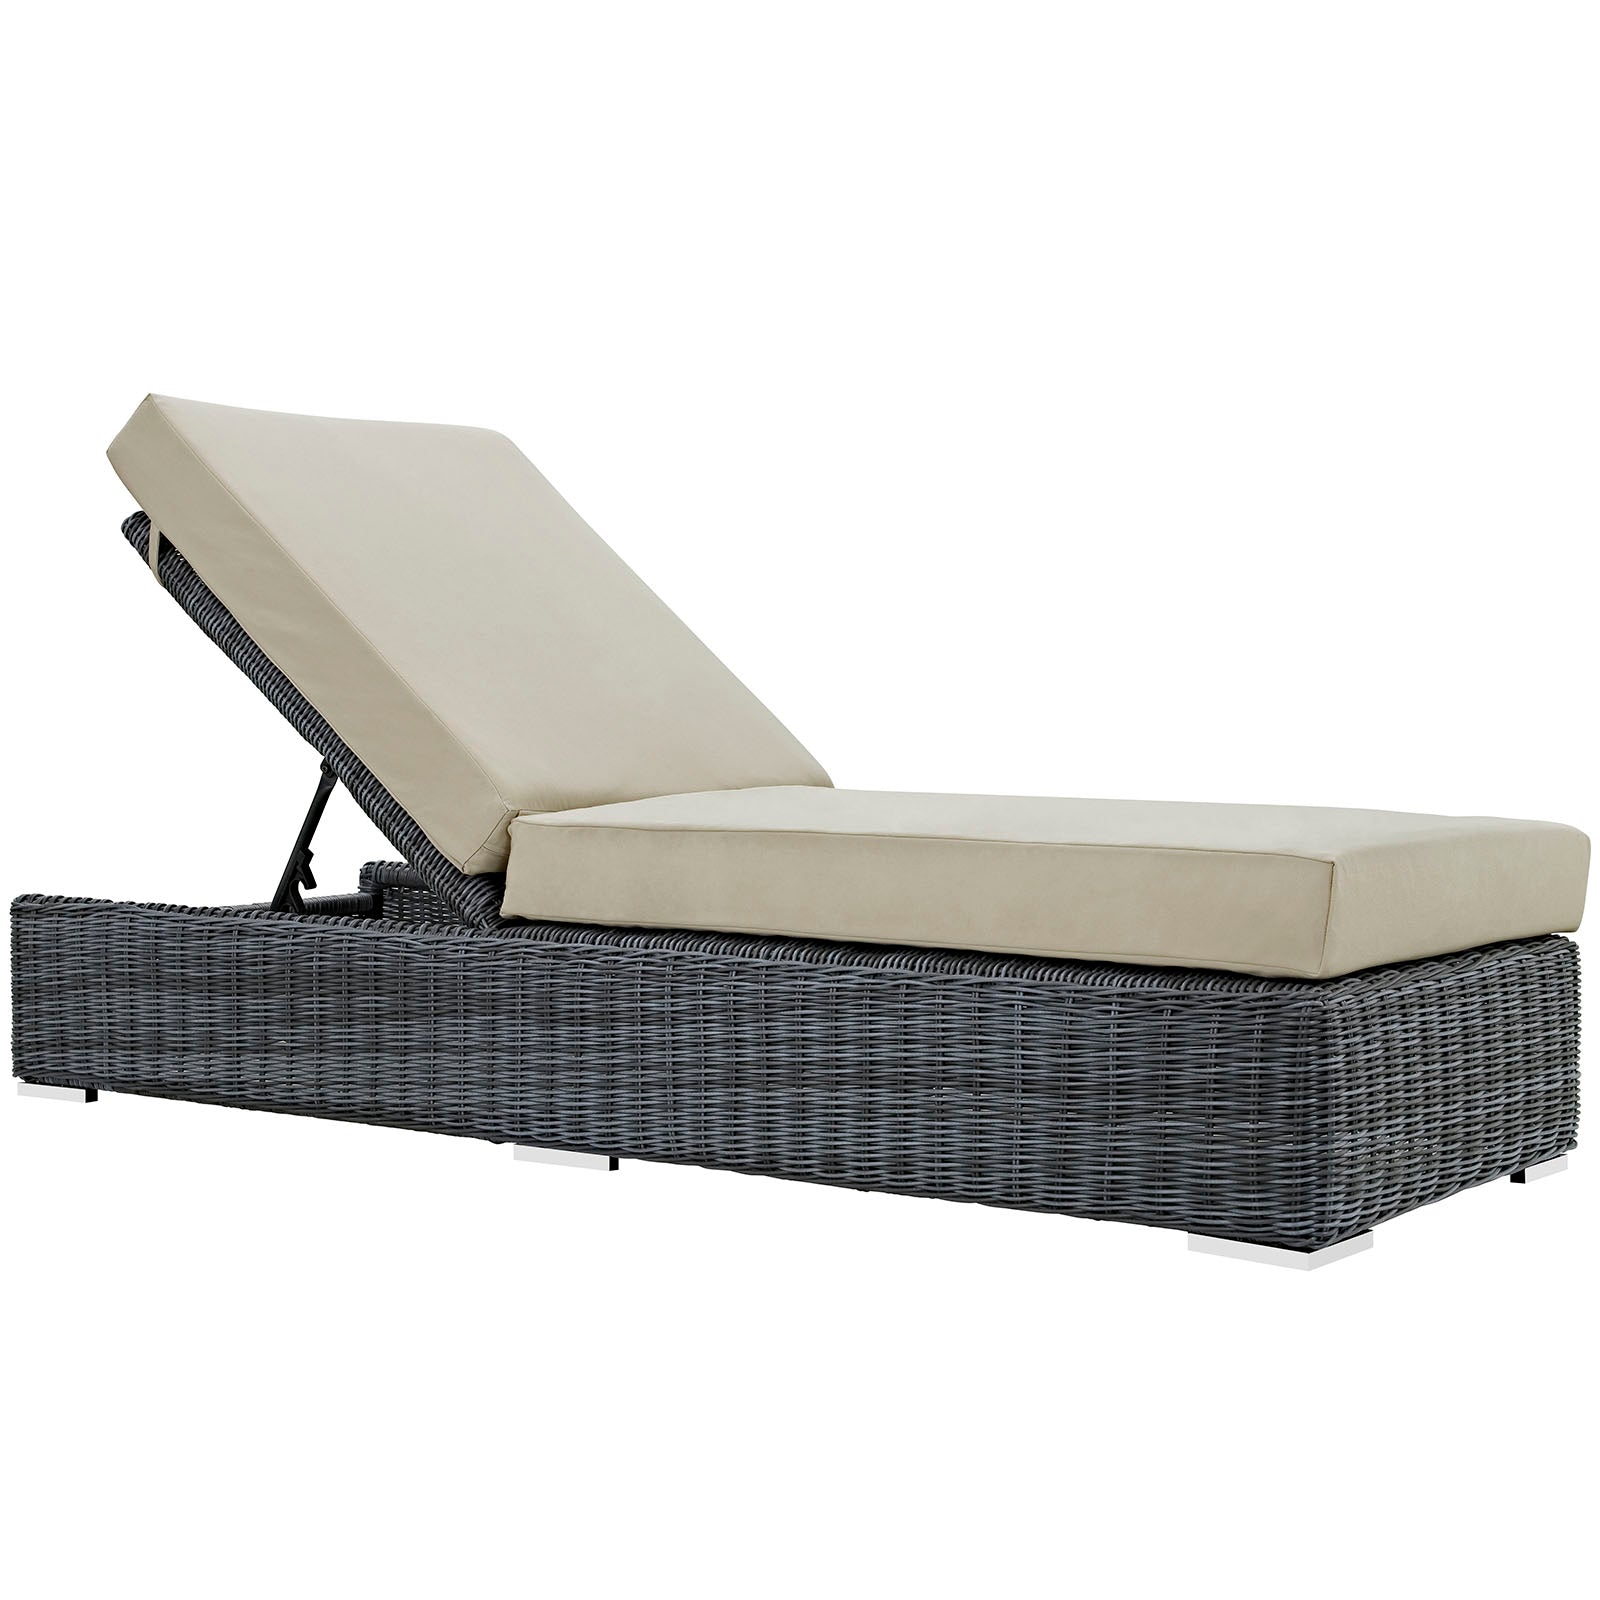 Modway Outdoor Loungers - Summon Outdoor Patio Sunbrella Chaise Lounge Canvas Antique Beige